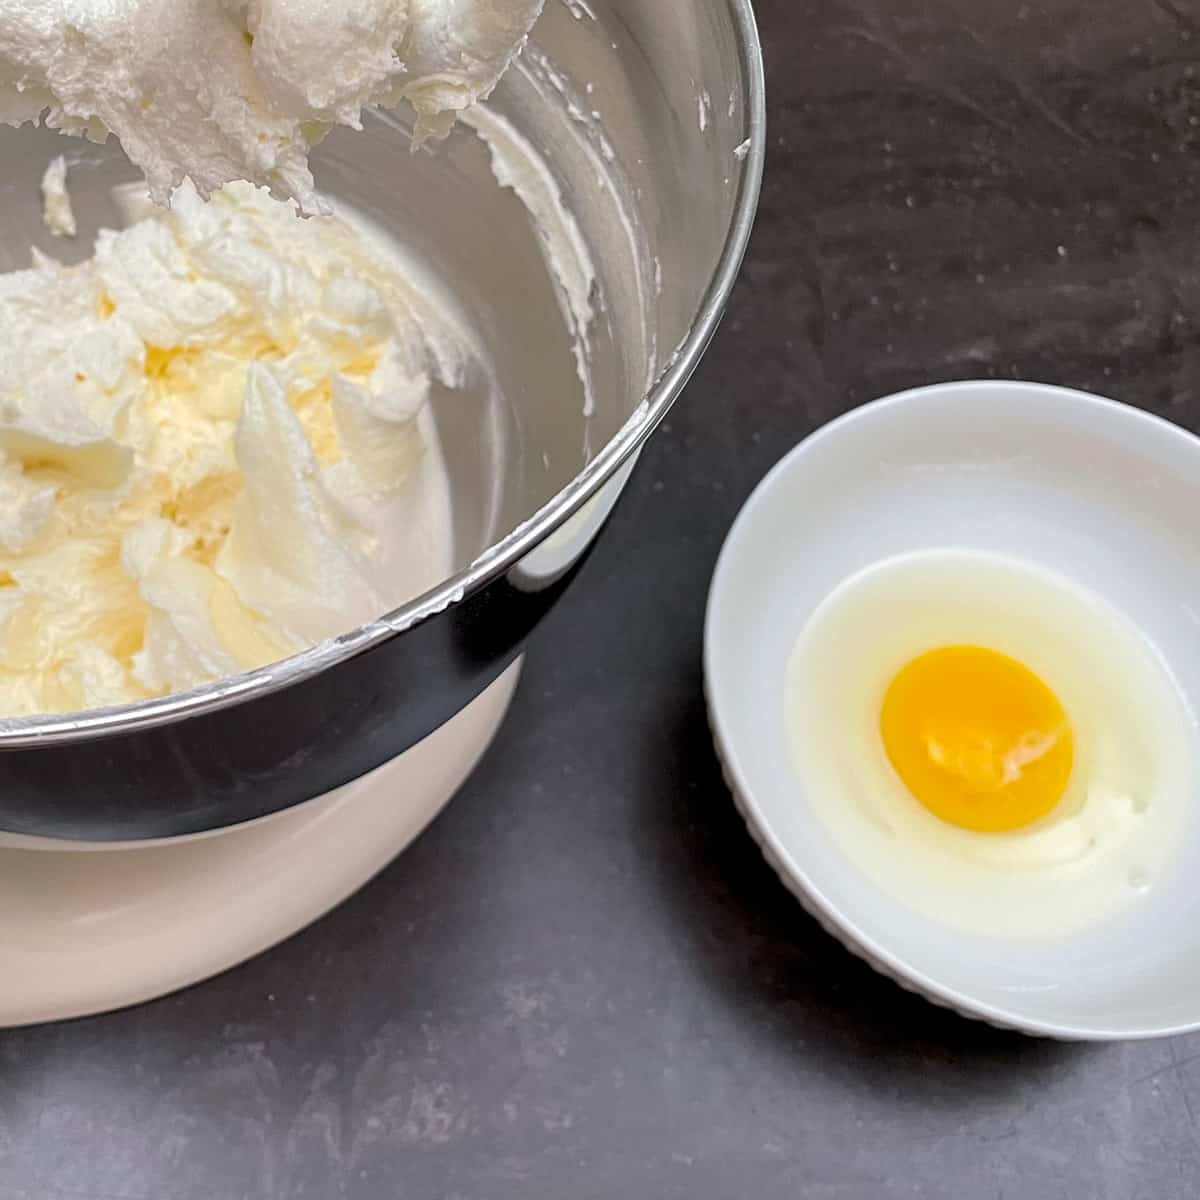 An egg in a bowl ready to be added to the cookie batter in the mixer.